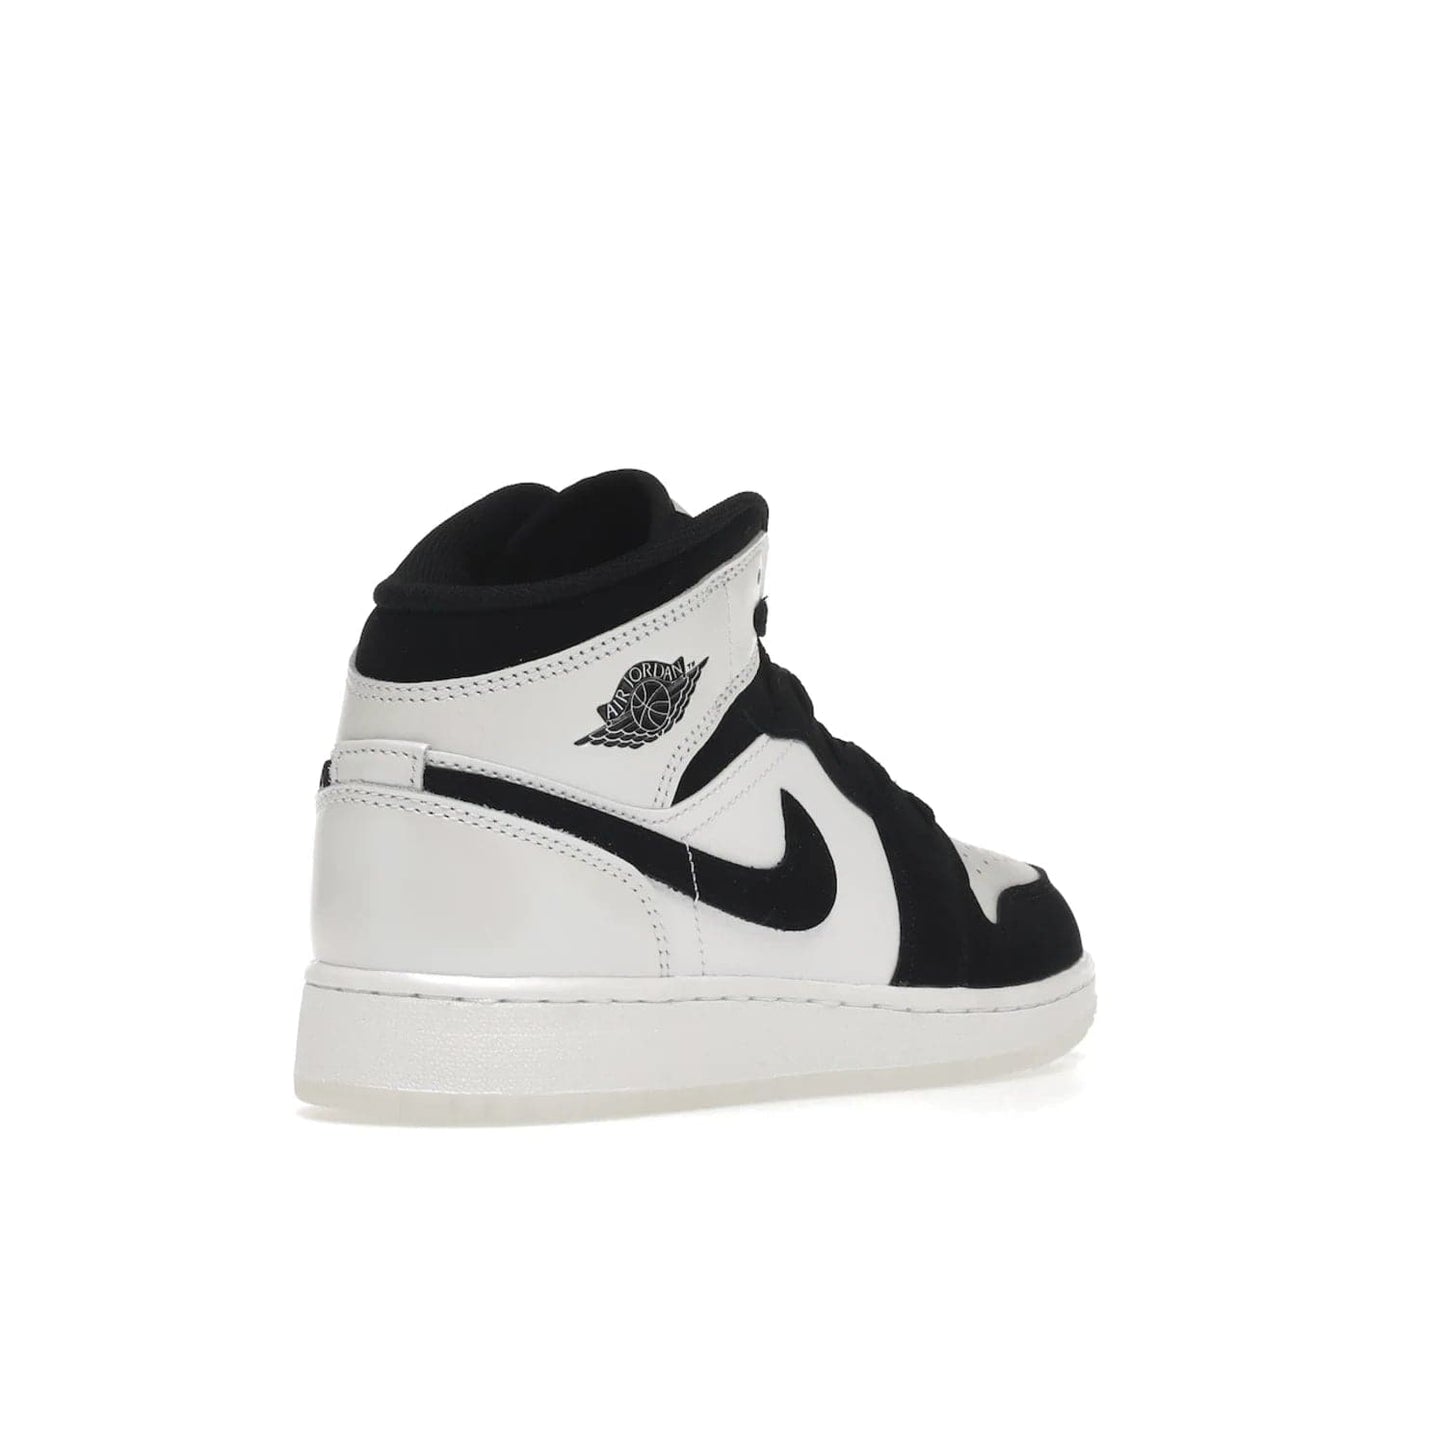 Jordan 1 Mid Diamond Shorts (GS) - Image 32 - Only at www.BallersClubKickz.com - Get the Jordan 1 Mid Diamond Shorts GS on 9th Feb 2022! Features a white, black & suede design with nylon tongue, stamped wings logo, rubber midsole & outsole. Only $100!